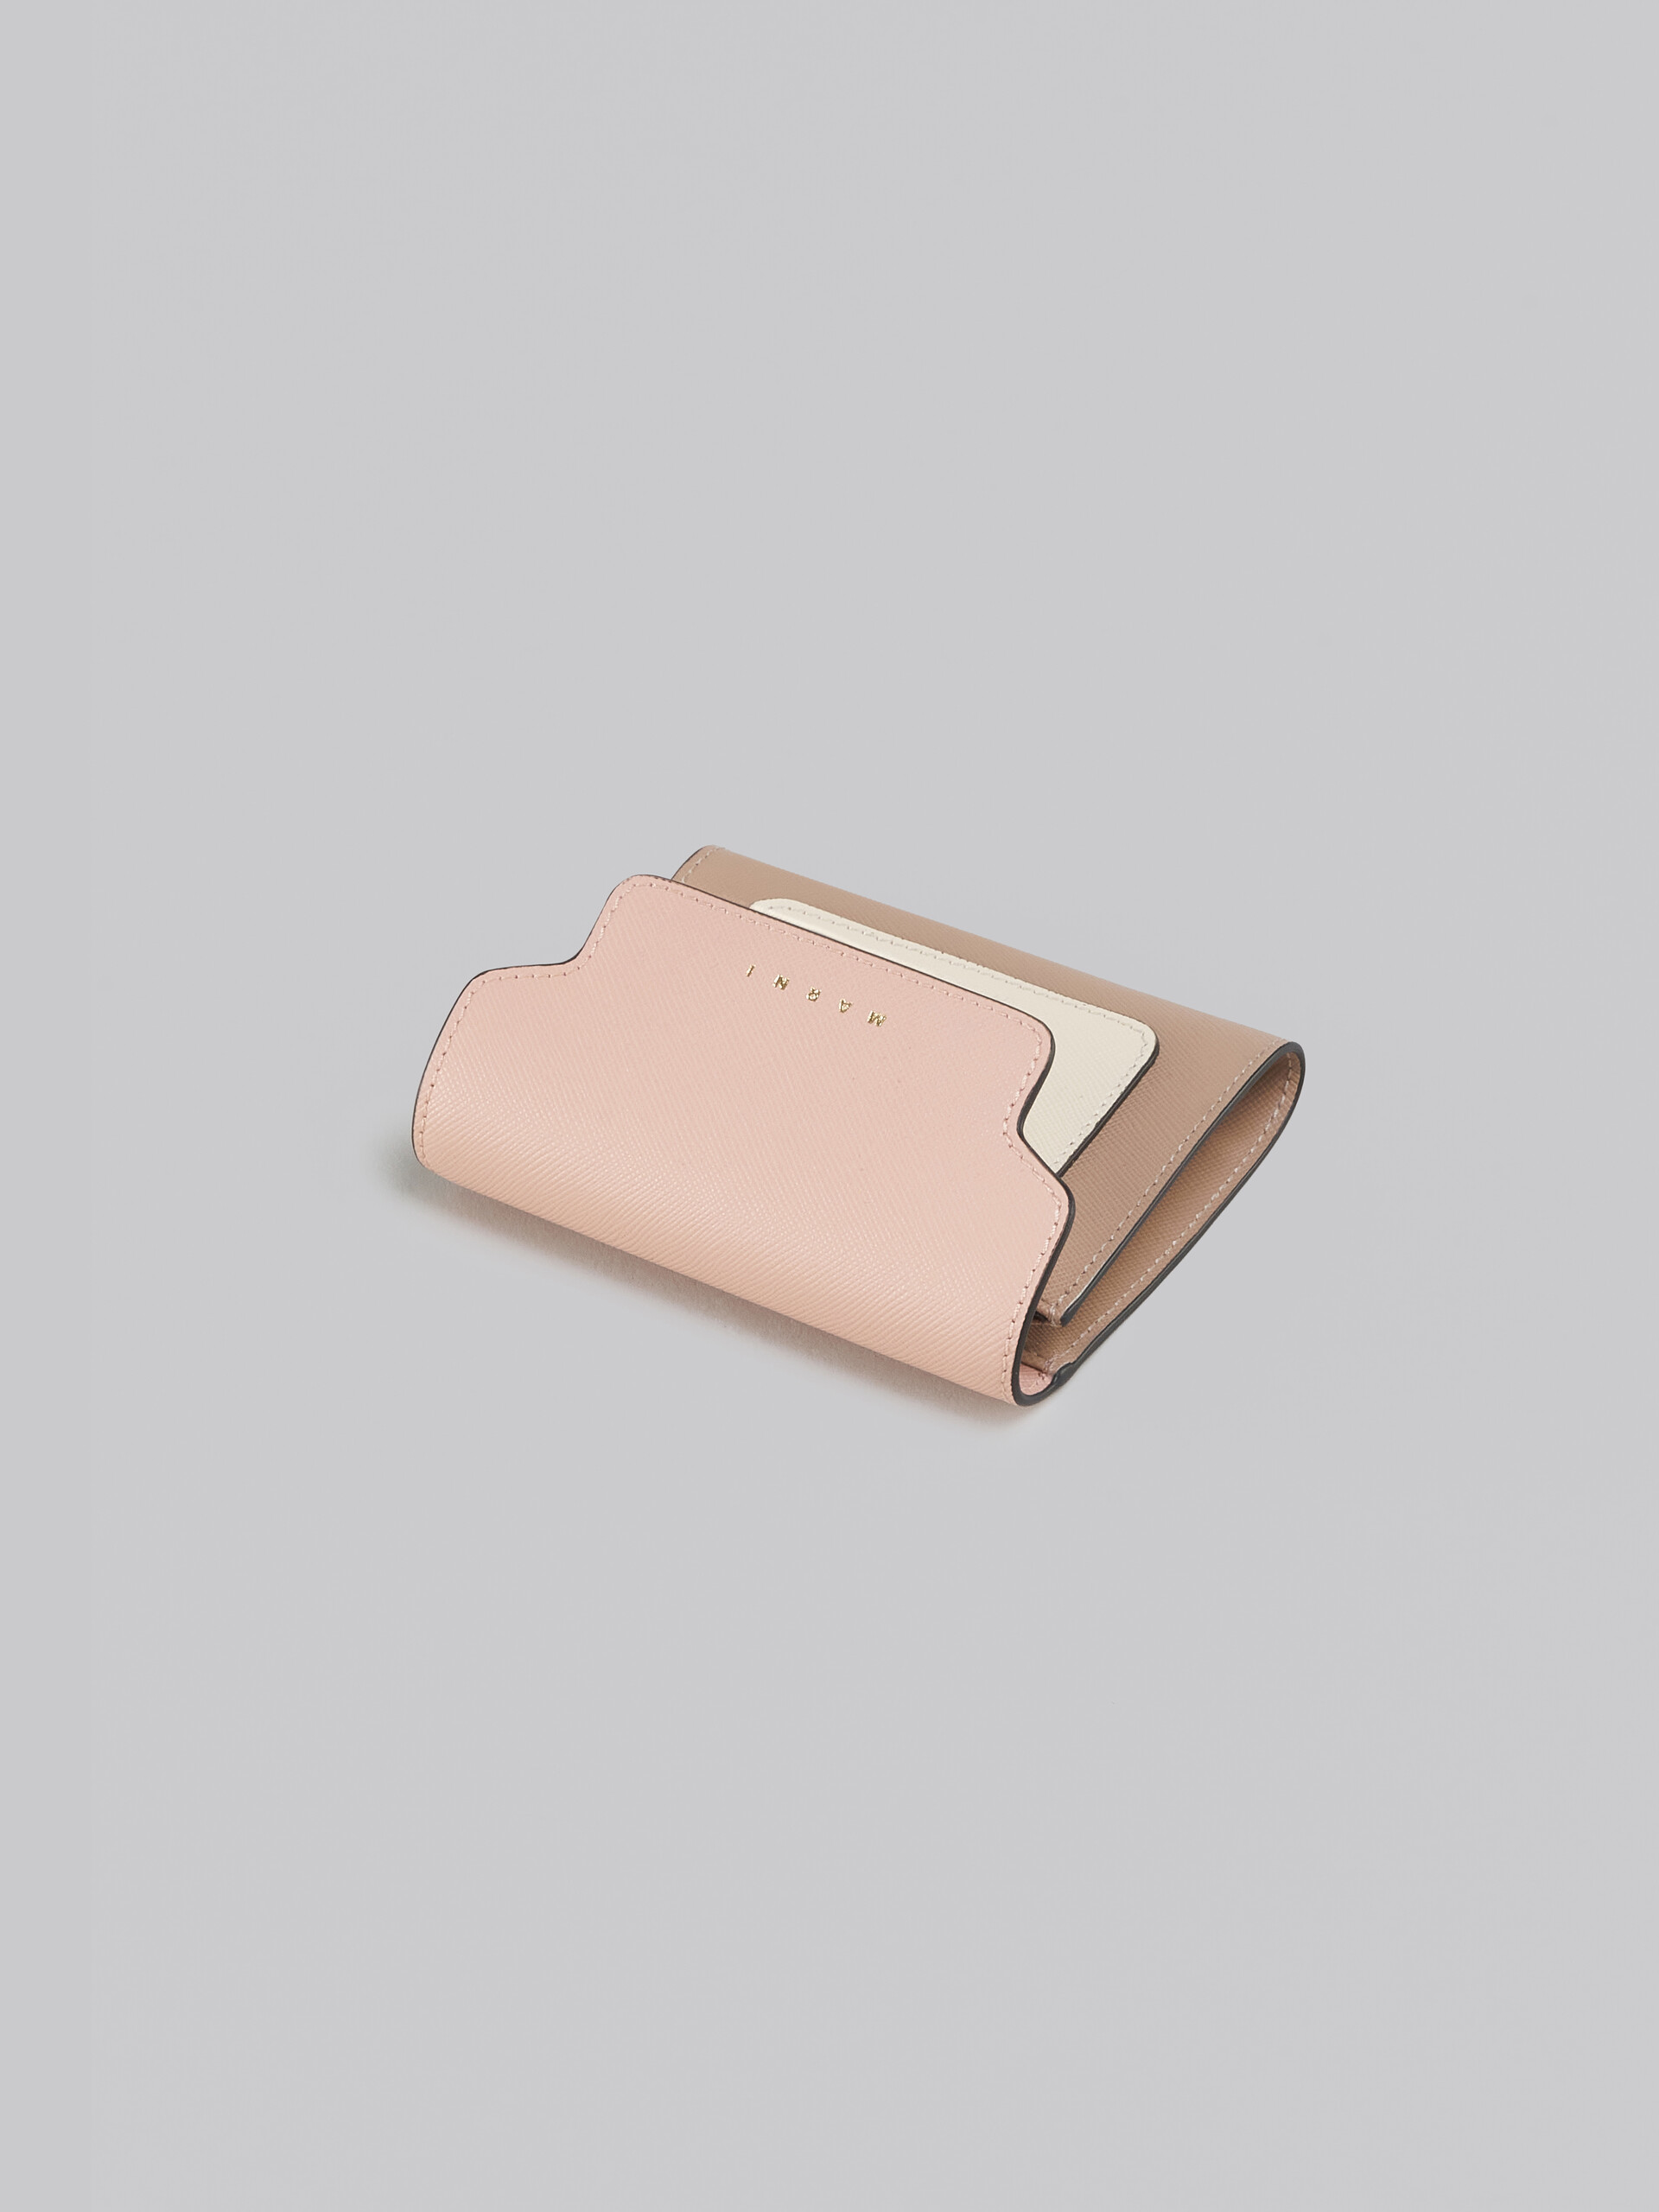 Pink white and beige saffiano leather wallet - Wallets - Image 4